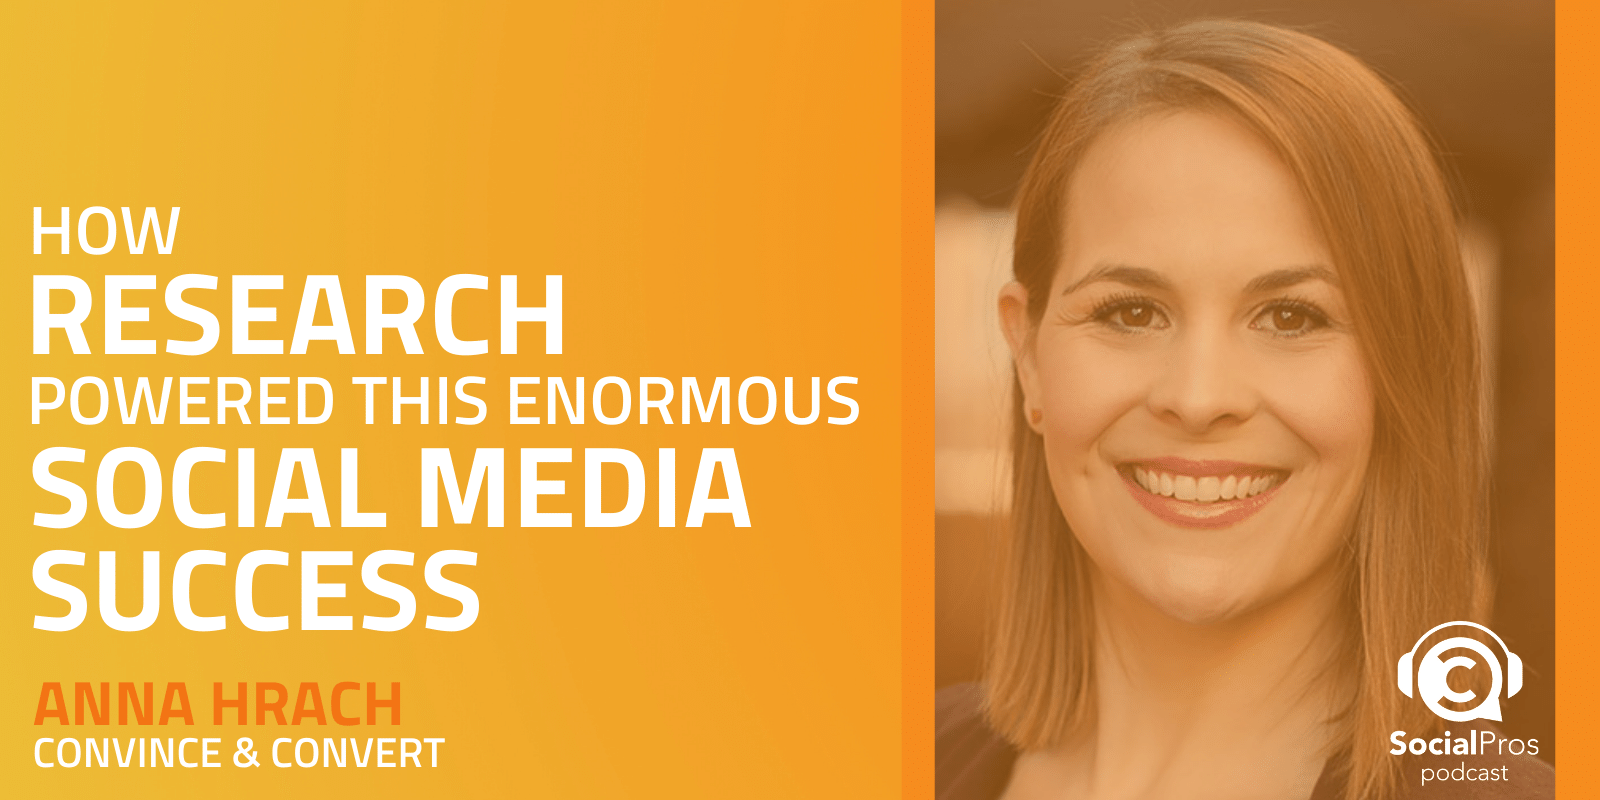 How Research Powered This Enormous Social Media Success